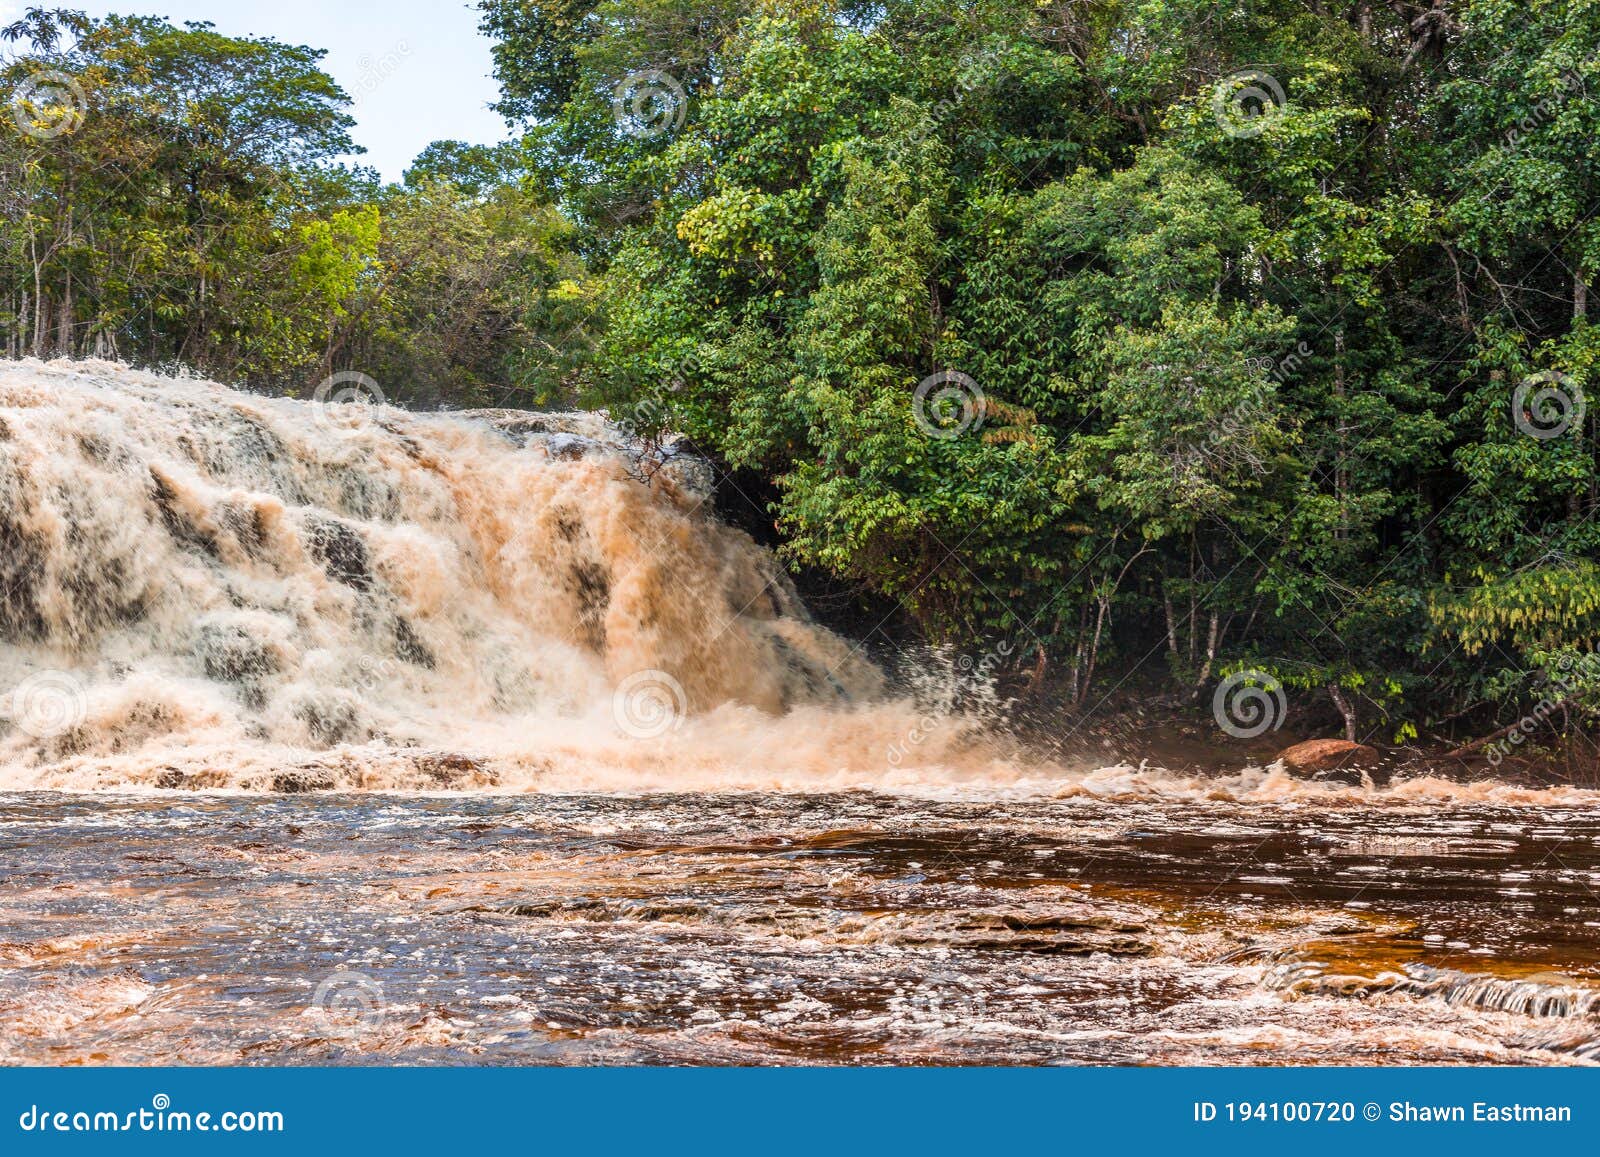 waterfall cascading into the amazon river at presidente figueiredo in brazil, south america